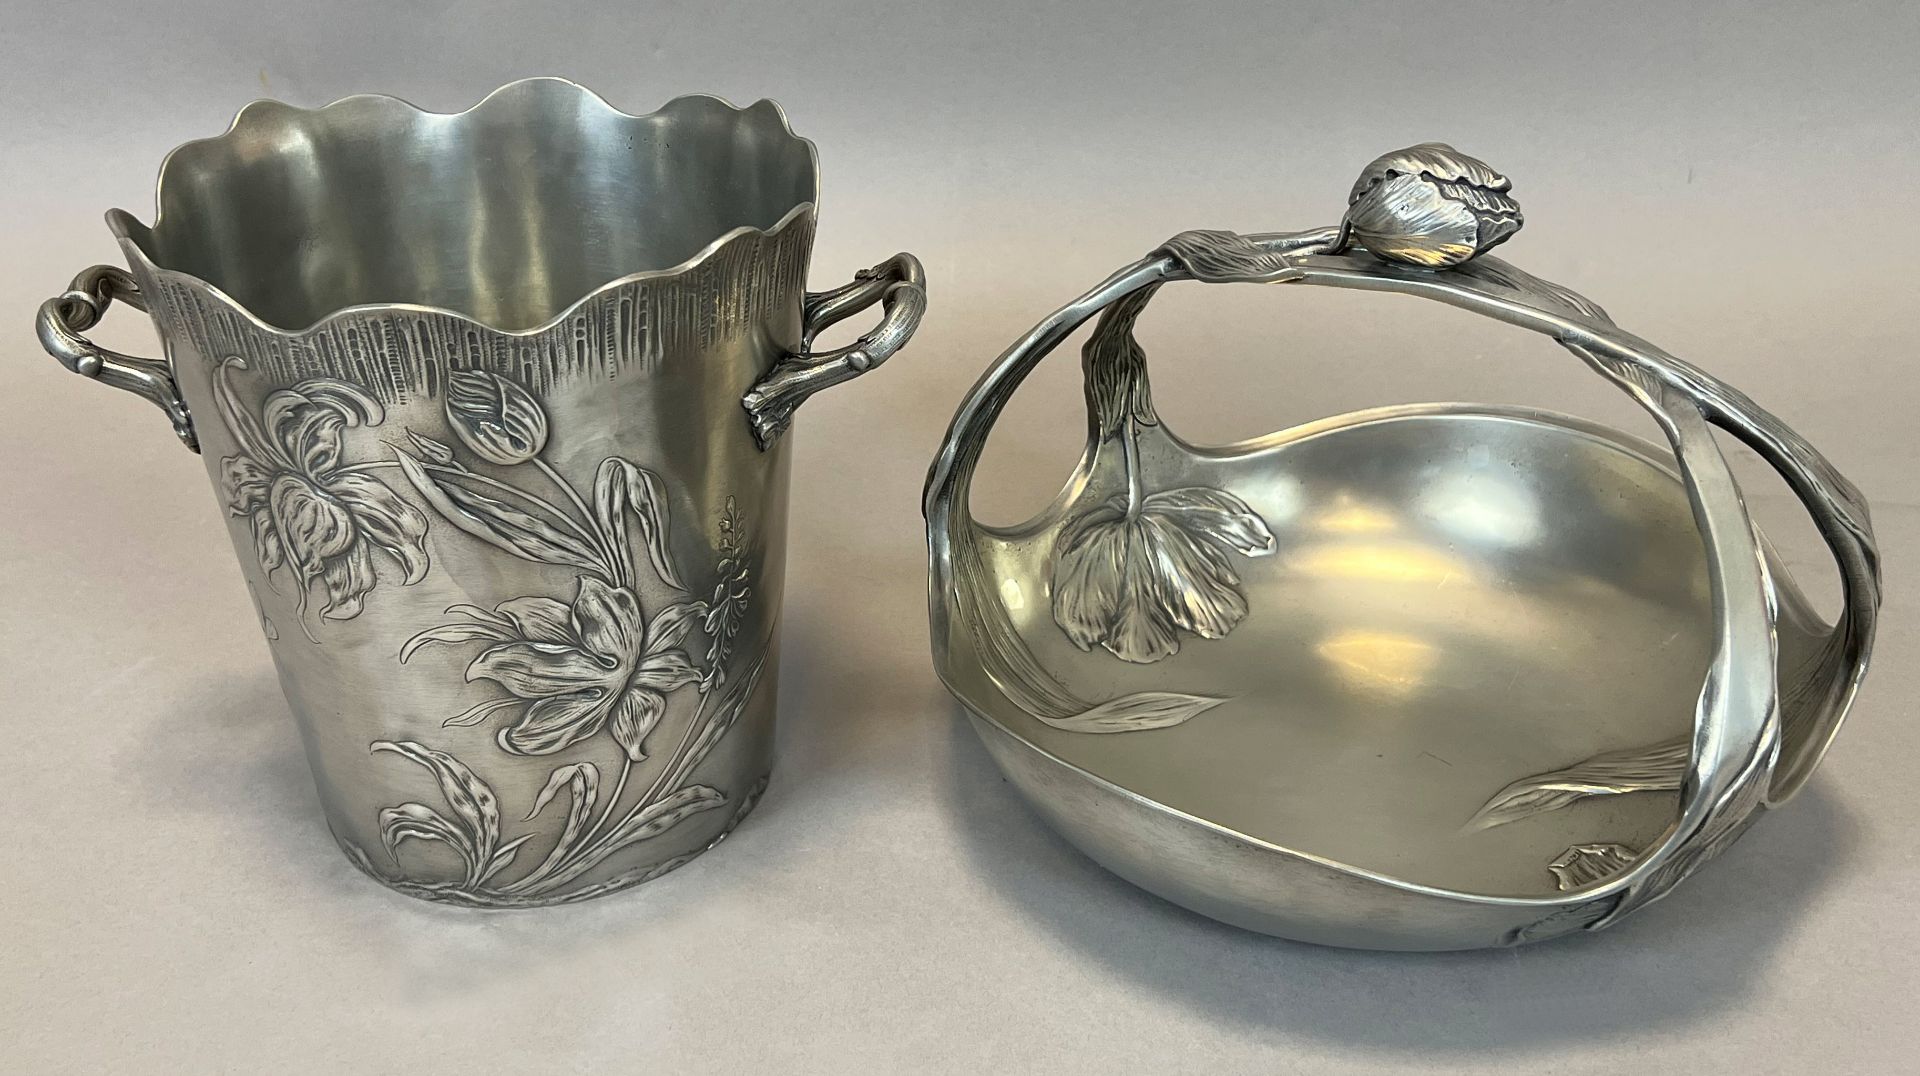 Achille GAMBA (1881 - 1944). Handle bowl and champagne cooler. Art Nouveau. Pewter. - Image 2 of 7